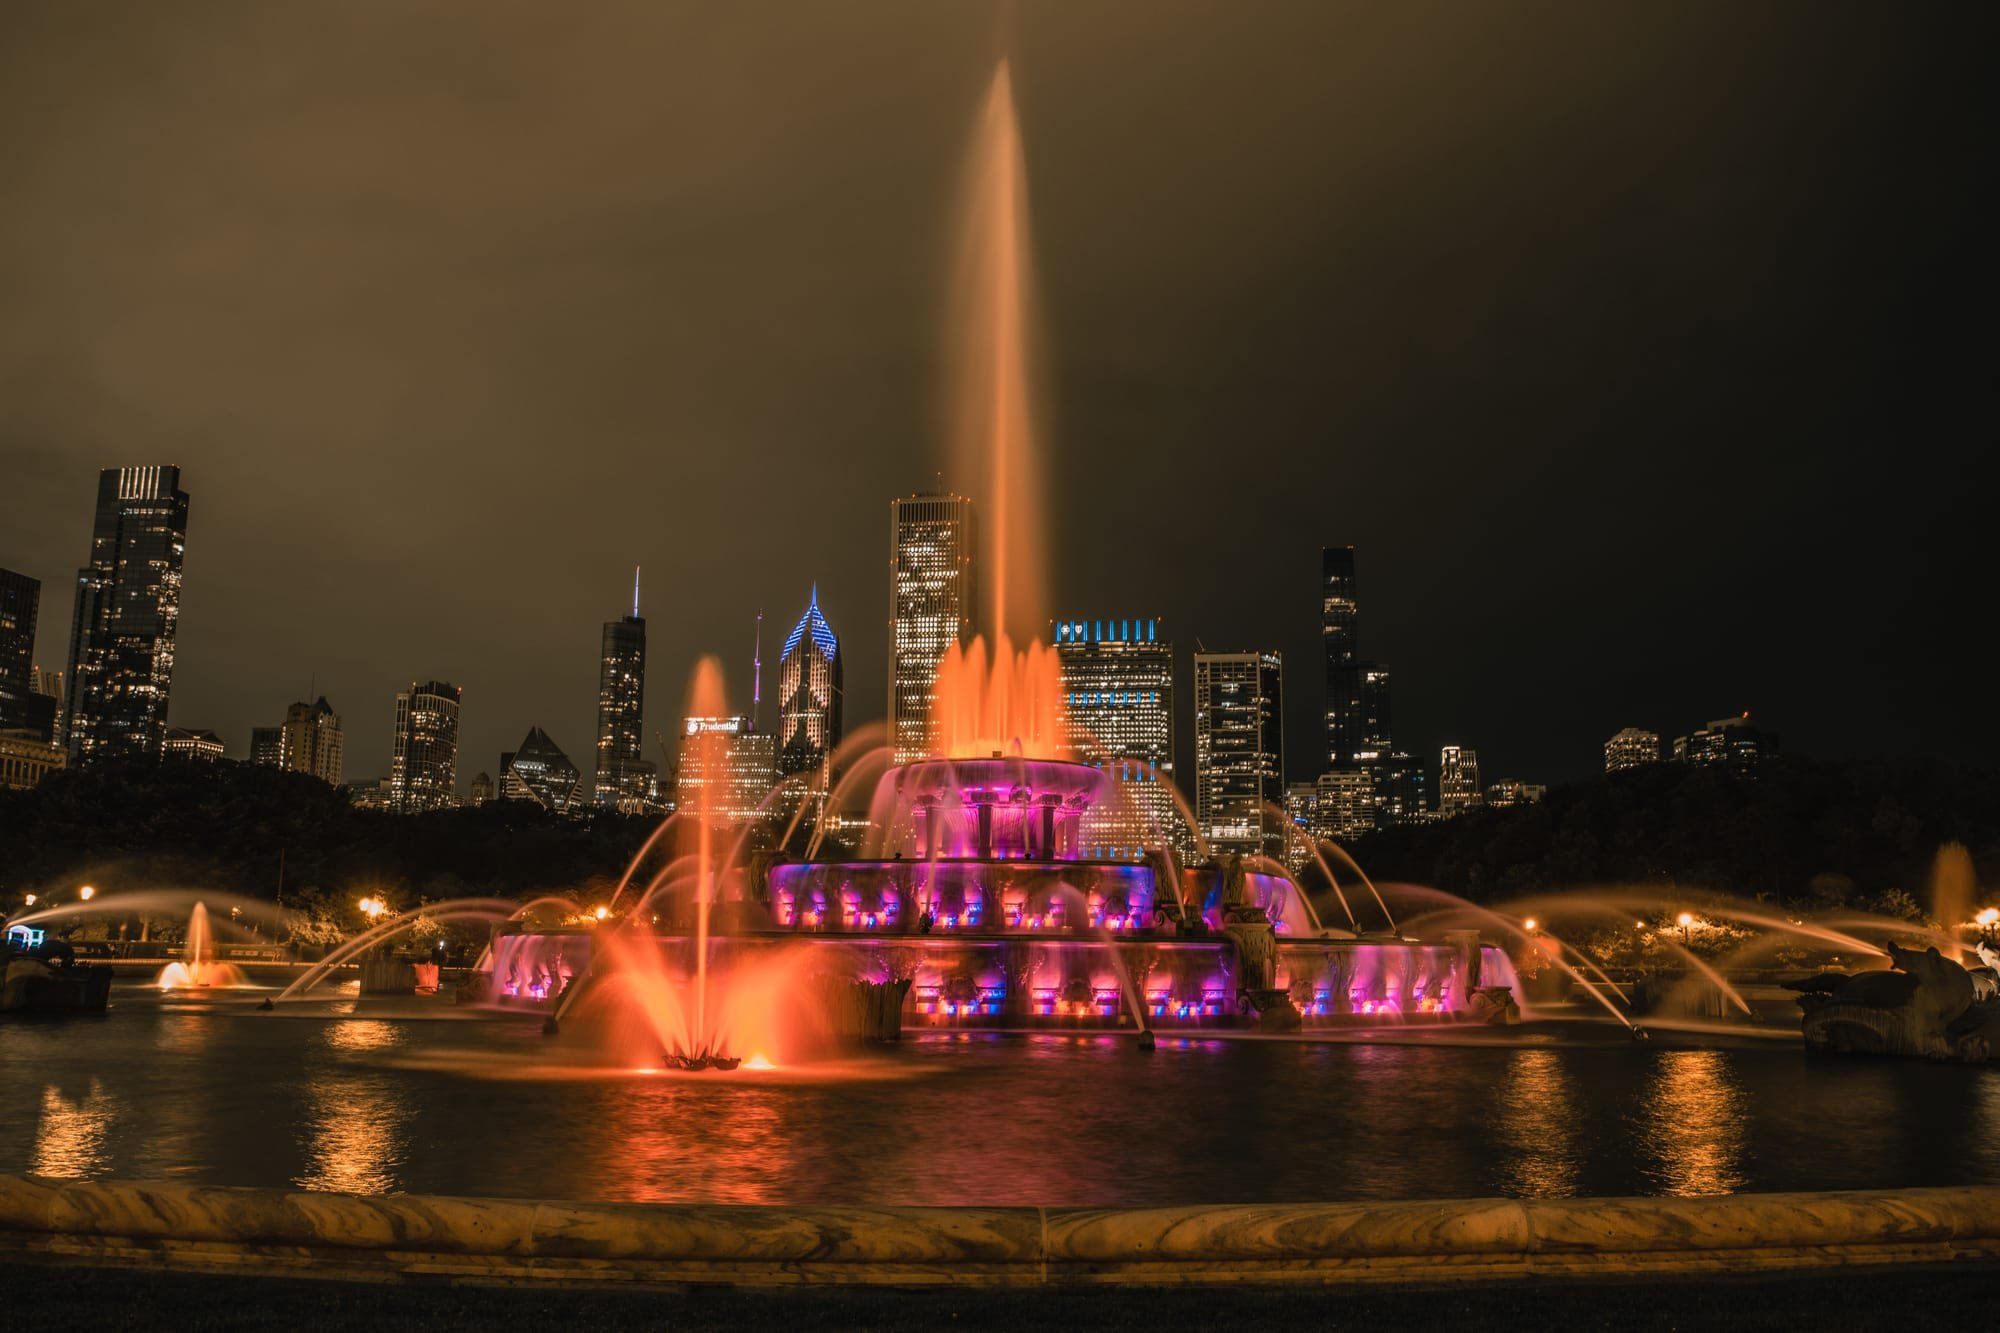 BUCKINGHAM FOUTAIN IN GRANT PARK | FAMOUS CHICAGO ATTRACTIONS